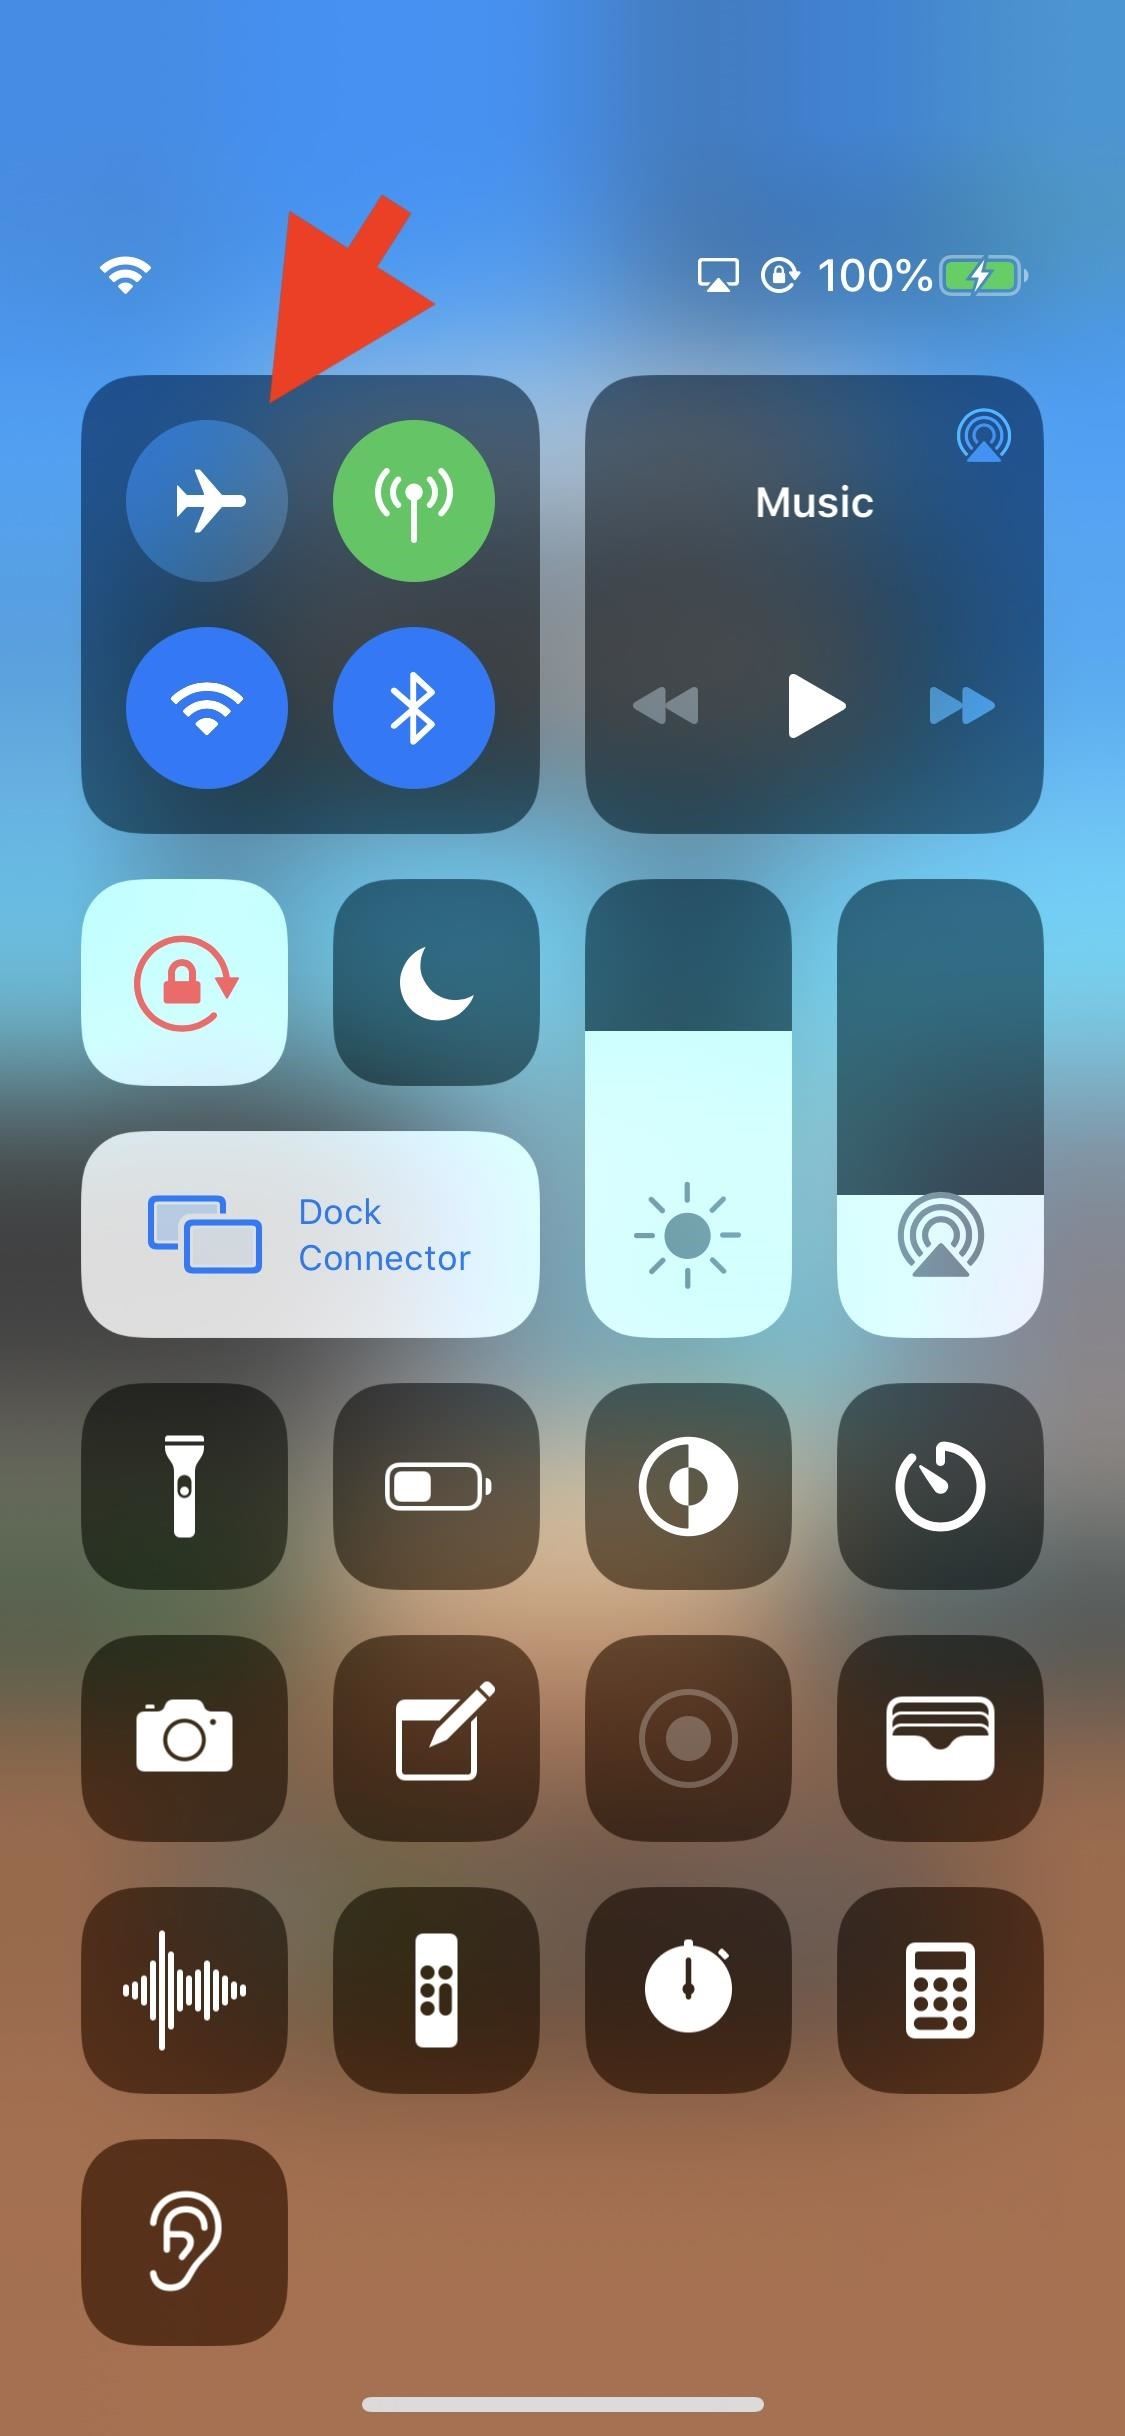 How to Block Ads in Games on Your iPhone for Distraction-Free Gameplay